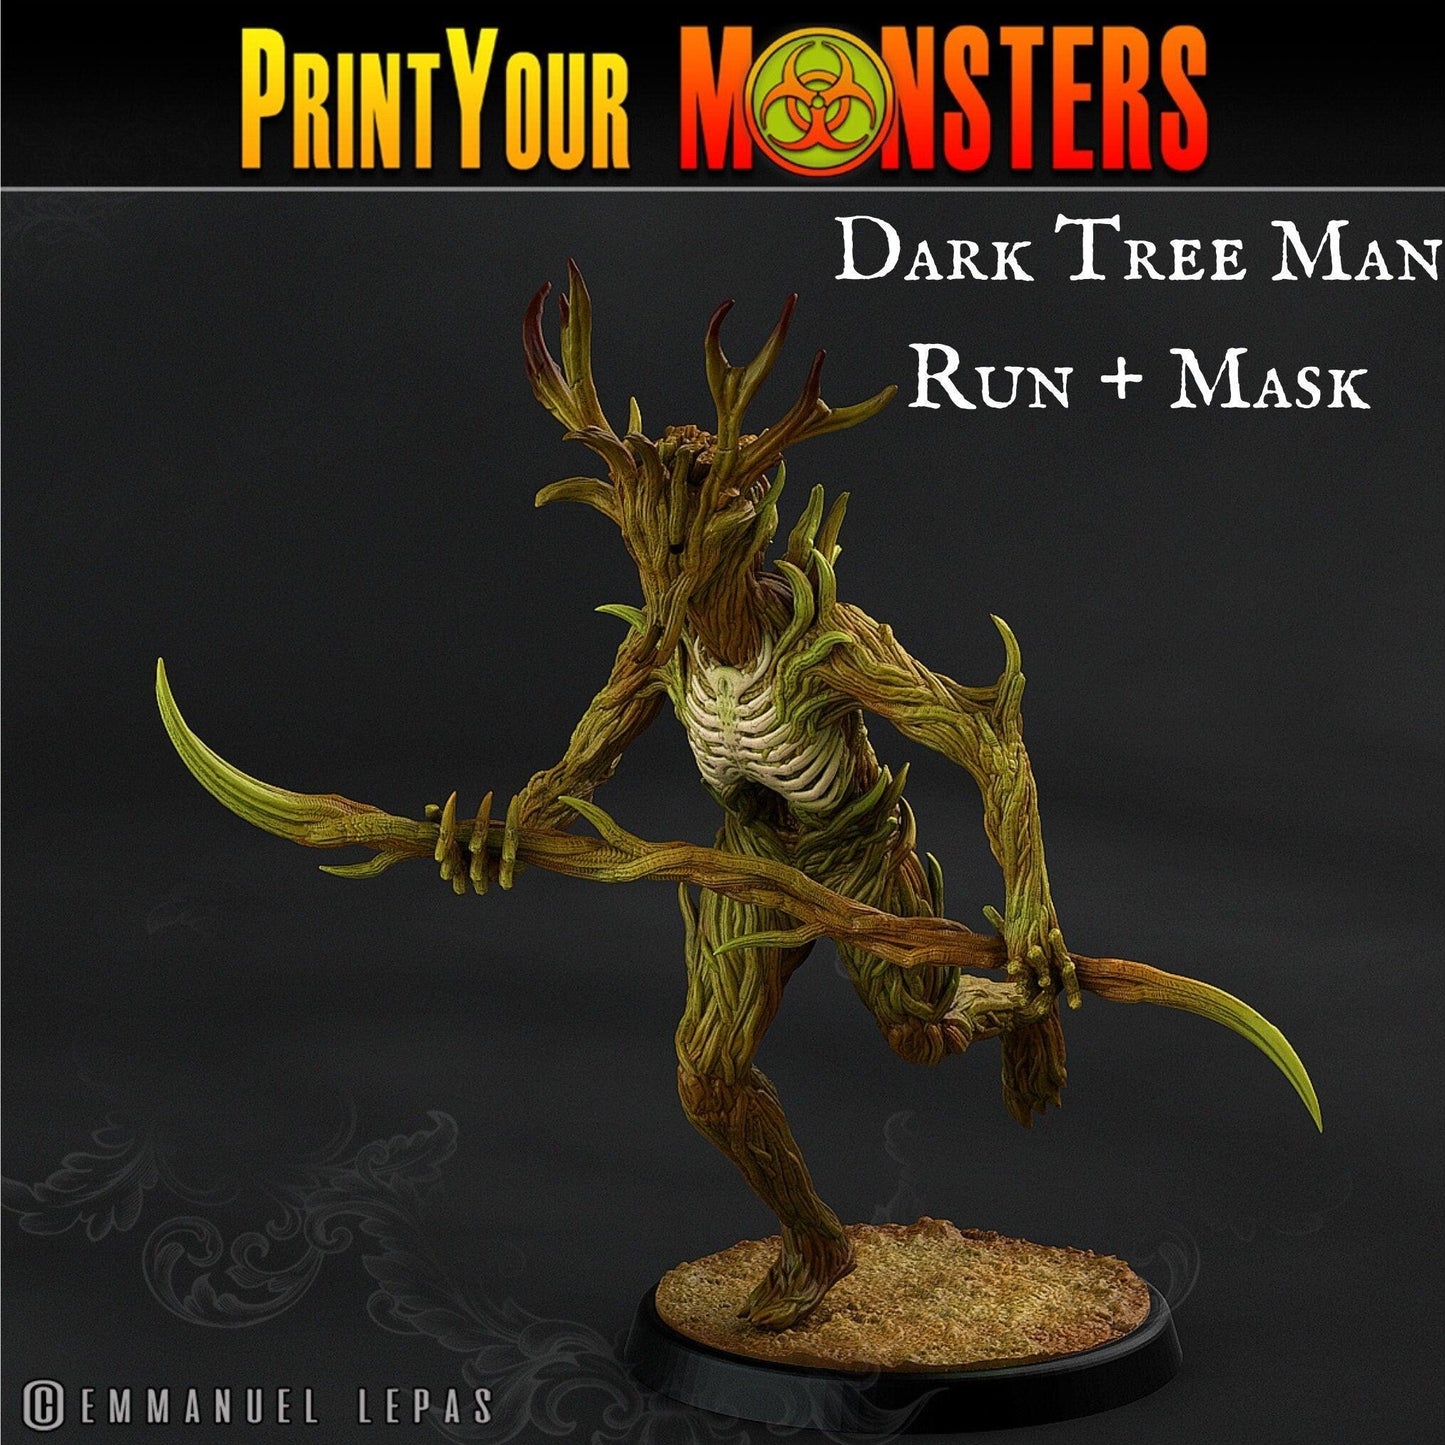 Dark Tree Man Miniatures 2 Axes | Print Your Monsters | Tabletop gaming | DnD Miniature | Dungeons and Dragons, dnd 5e dnd monster treant - Plague Miniatures shop for DnD Miniatures